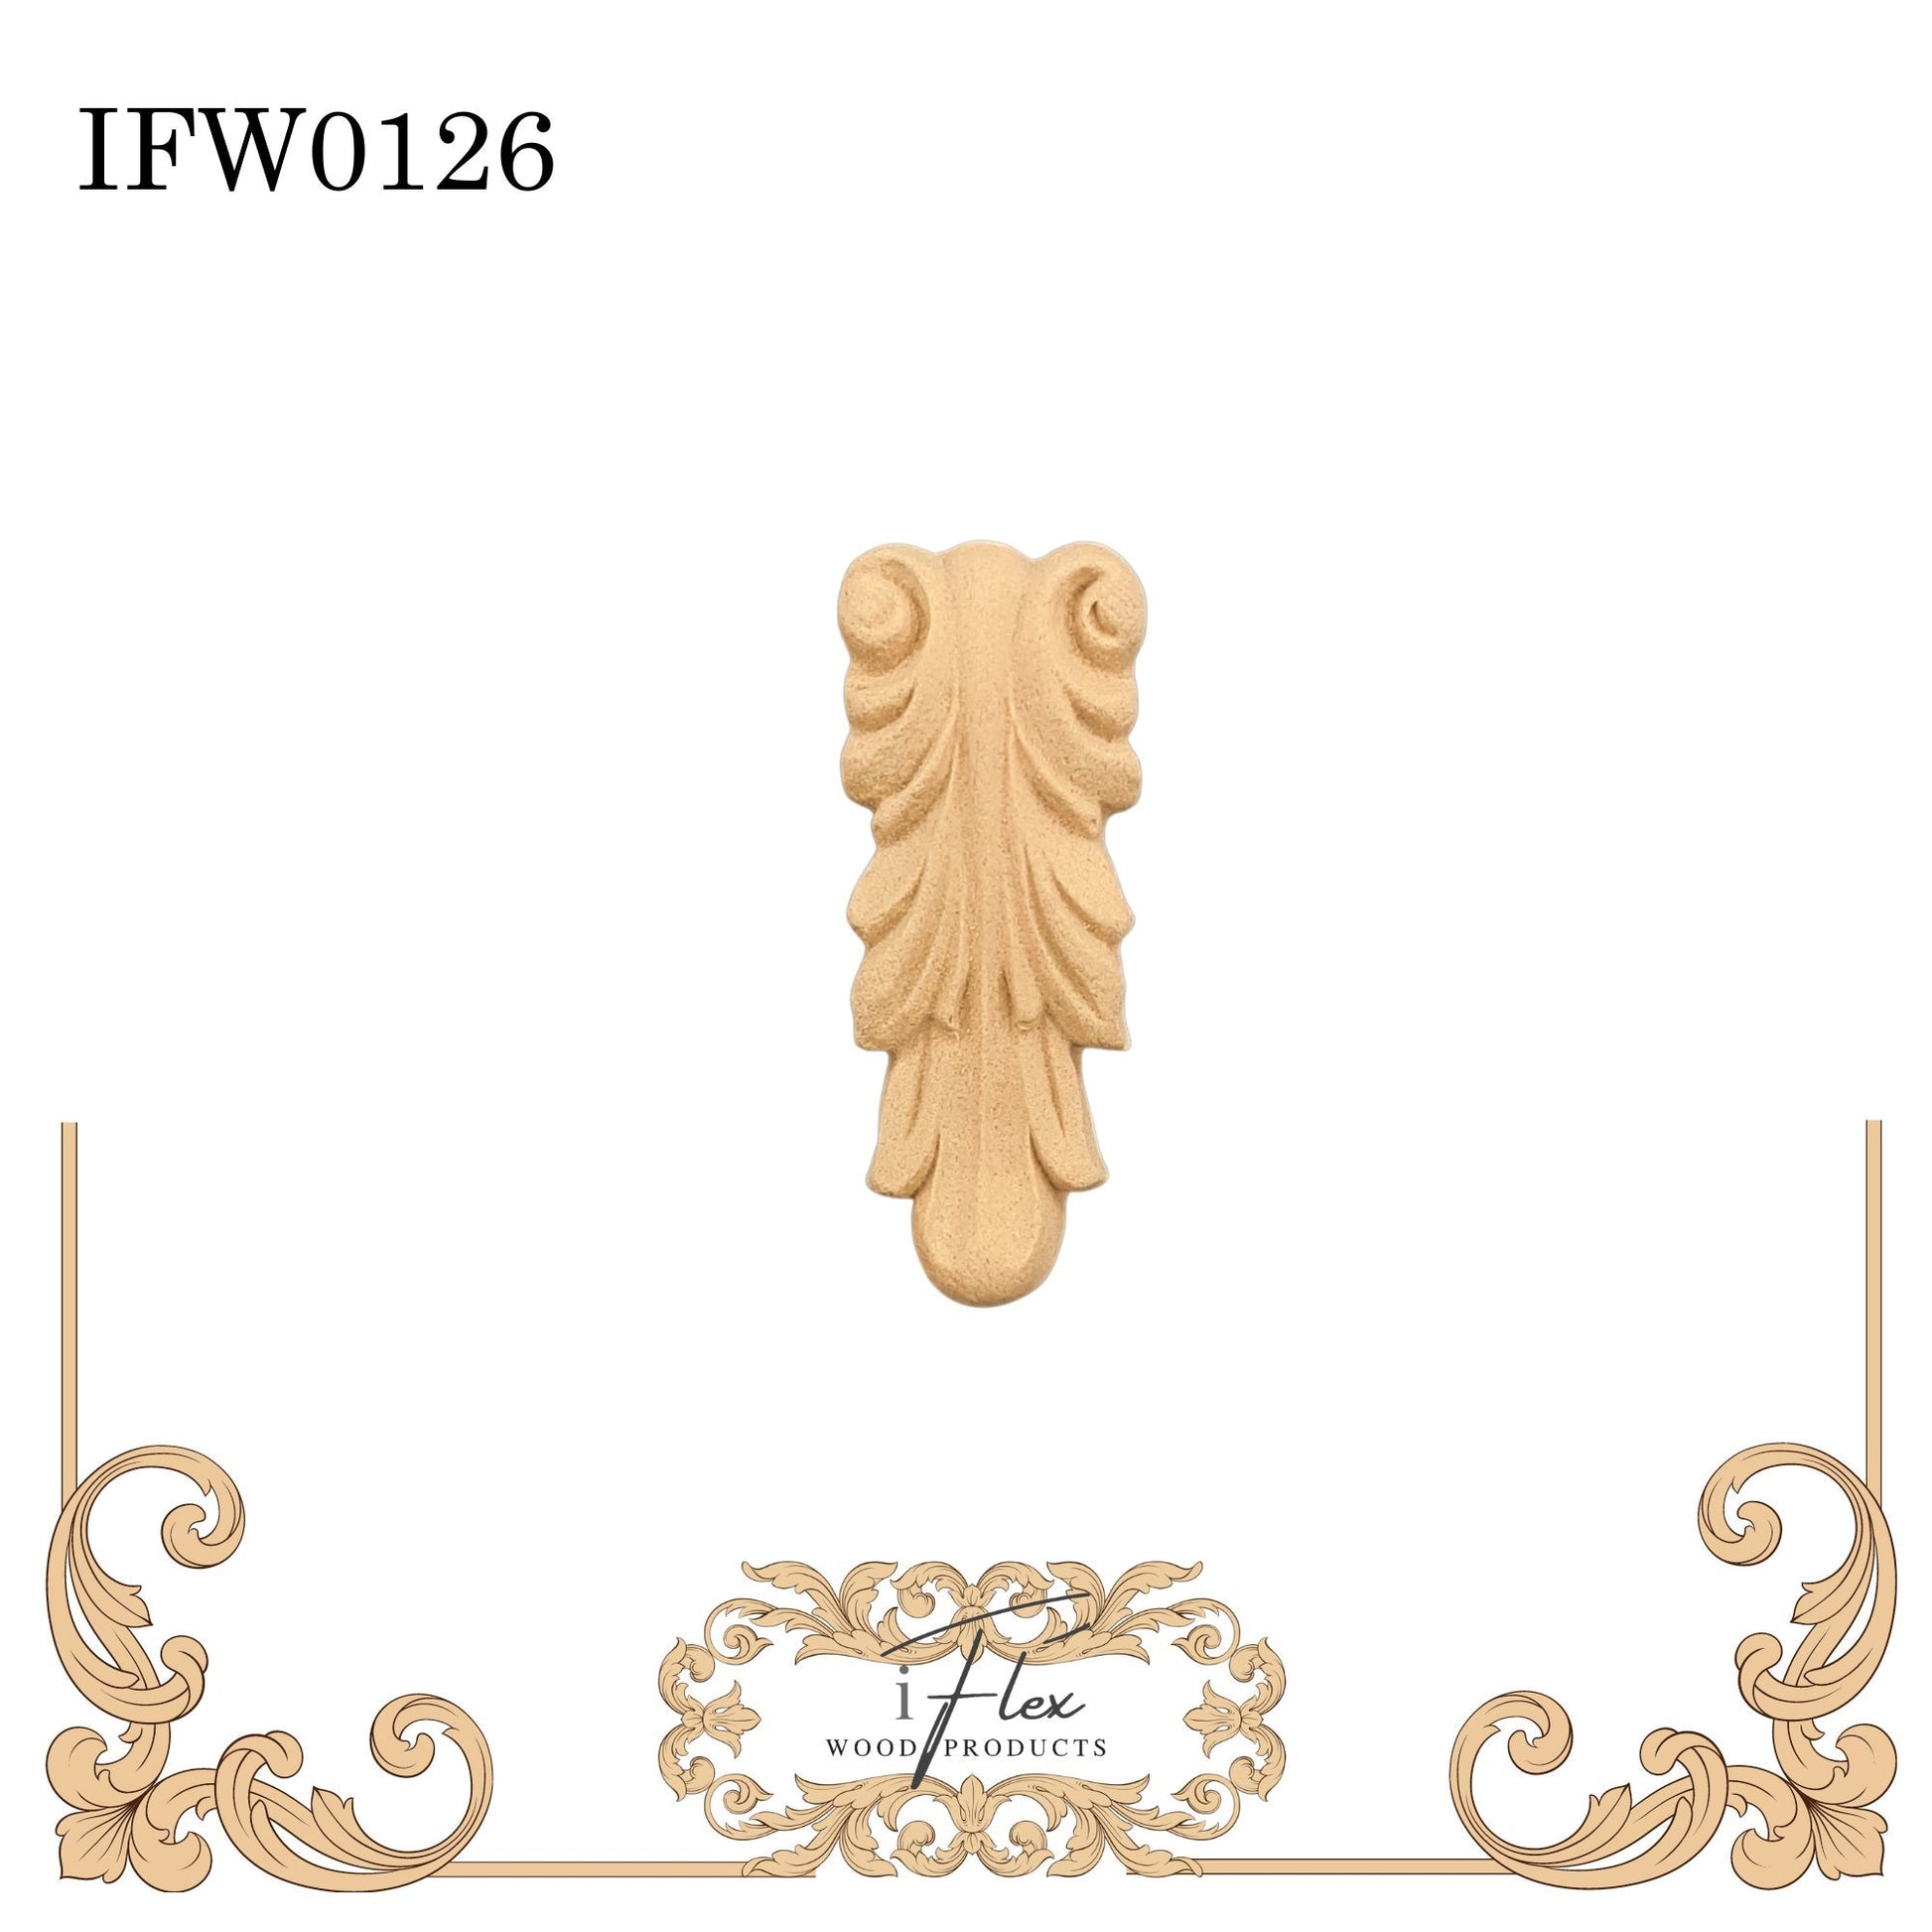 IFW 0126 iFlex Wood Products Corbel bendable mouldings, flexible, wooden appliques